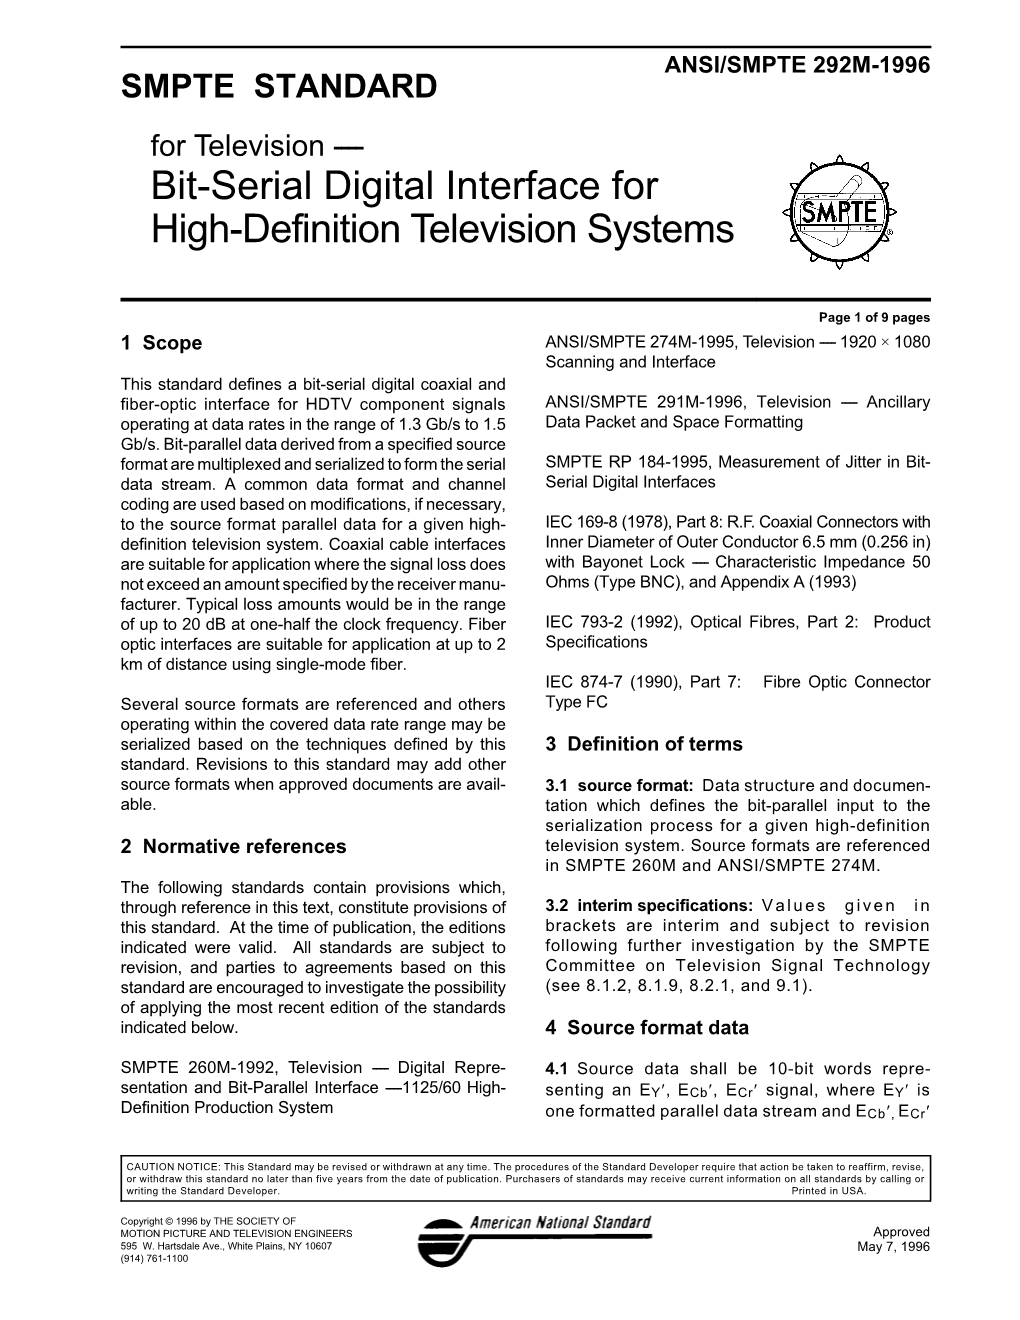 Bit-Serial Digital Interface for High-Definition Television Systems